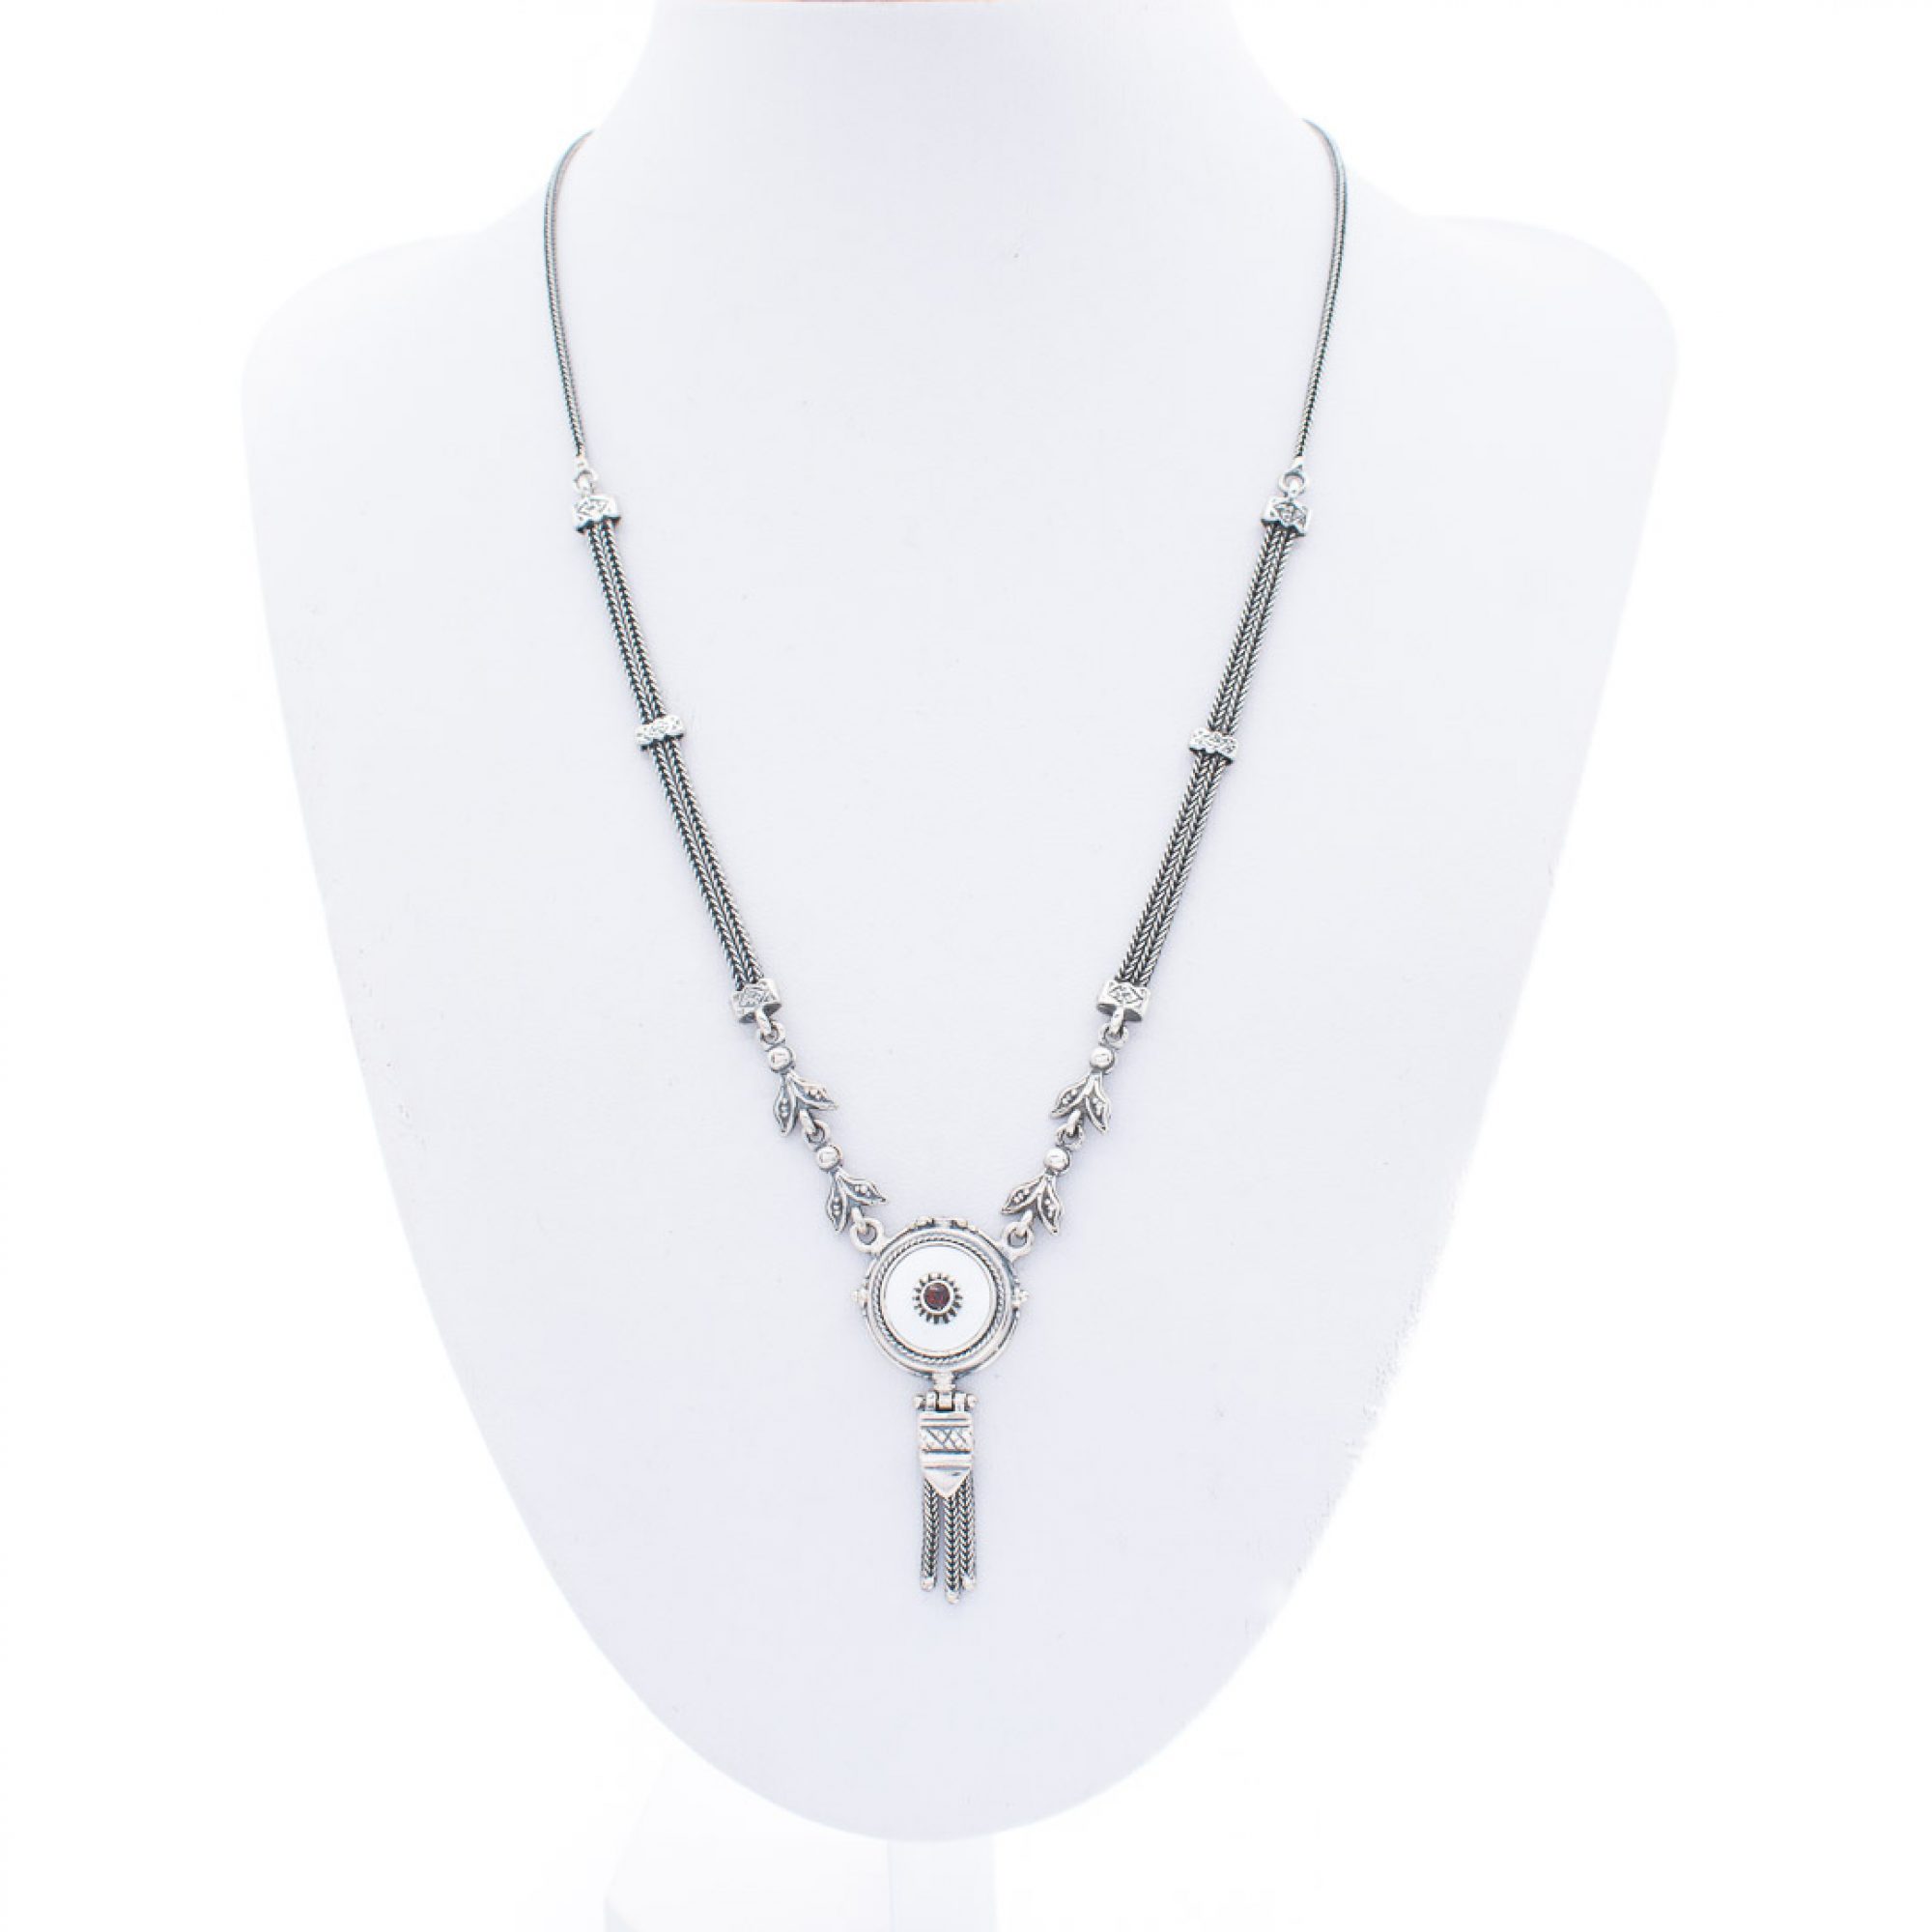 Oxidised necklace with mother of pearl and garnet